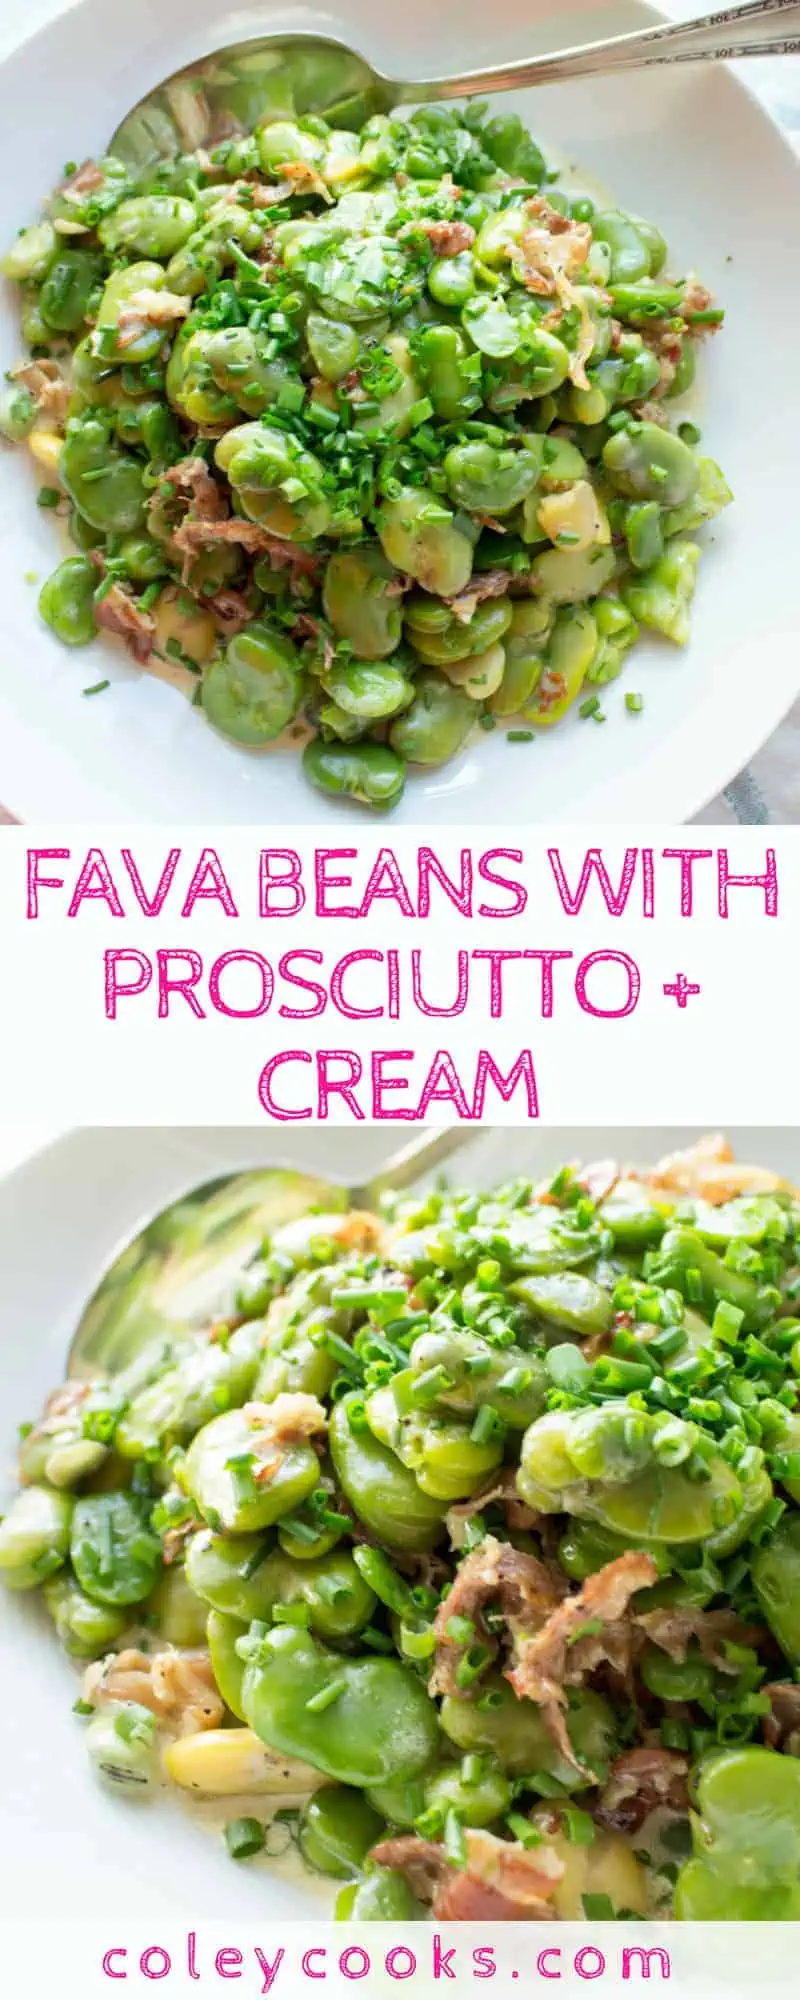 FAVA BEANS with PROSCIUTTO + CREAM | Easy fava bean recipe for spring! Creamy beans with salty prosciutto and a luscious sauce. #side #prosciutto #glutenfree #fava #beans #recipe #spring | ColeyCooks.com